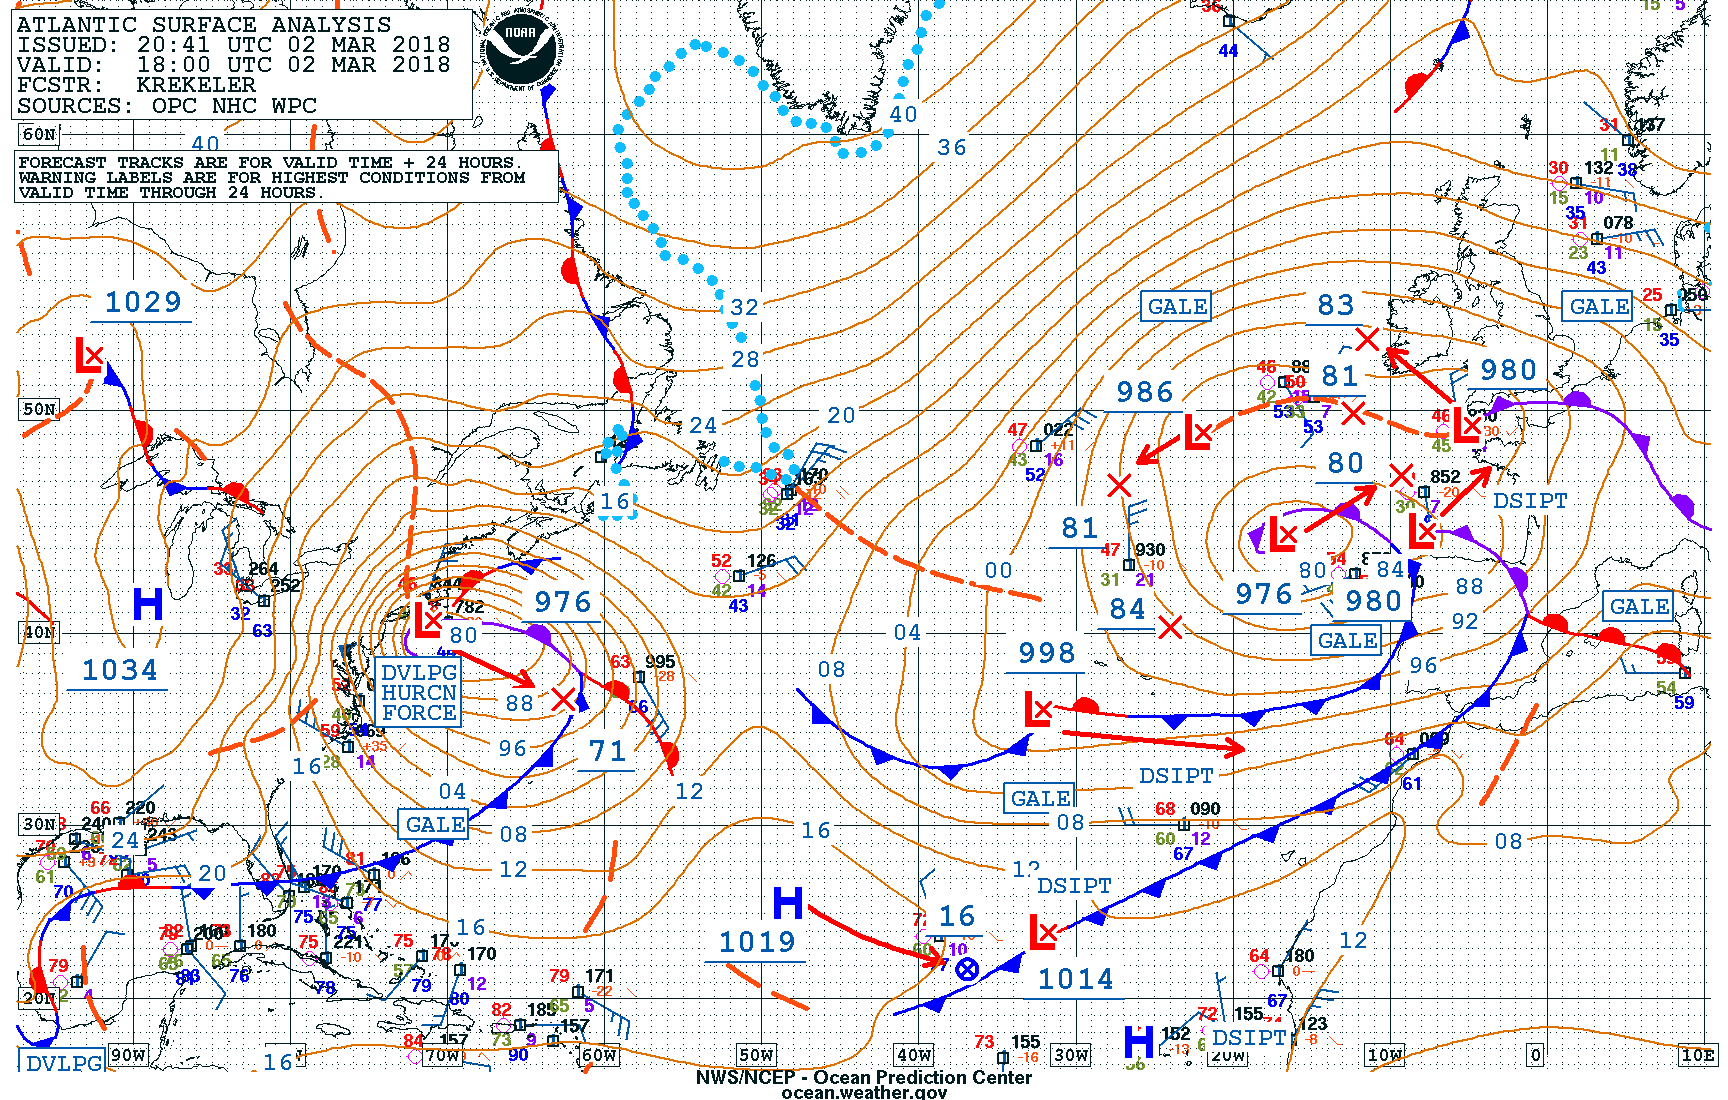 Historical Swell Event - March 4-7, 2018